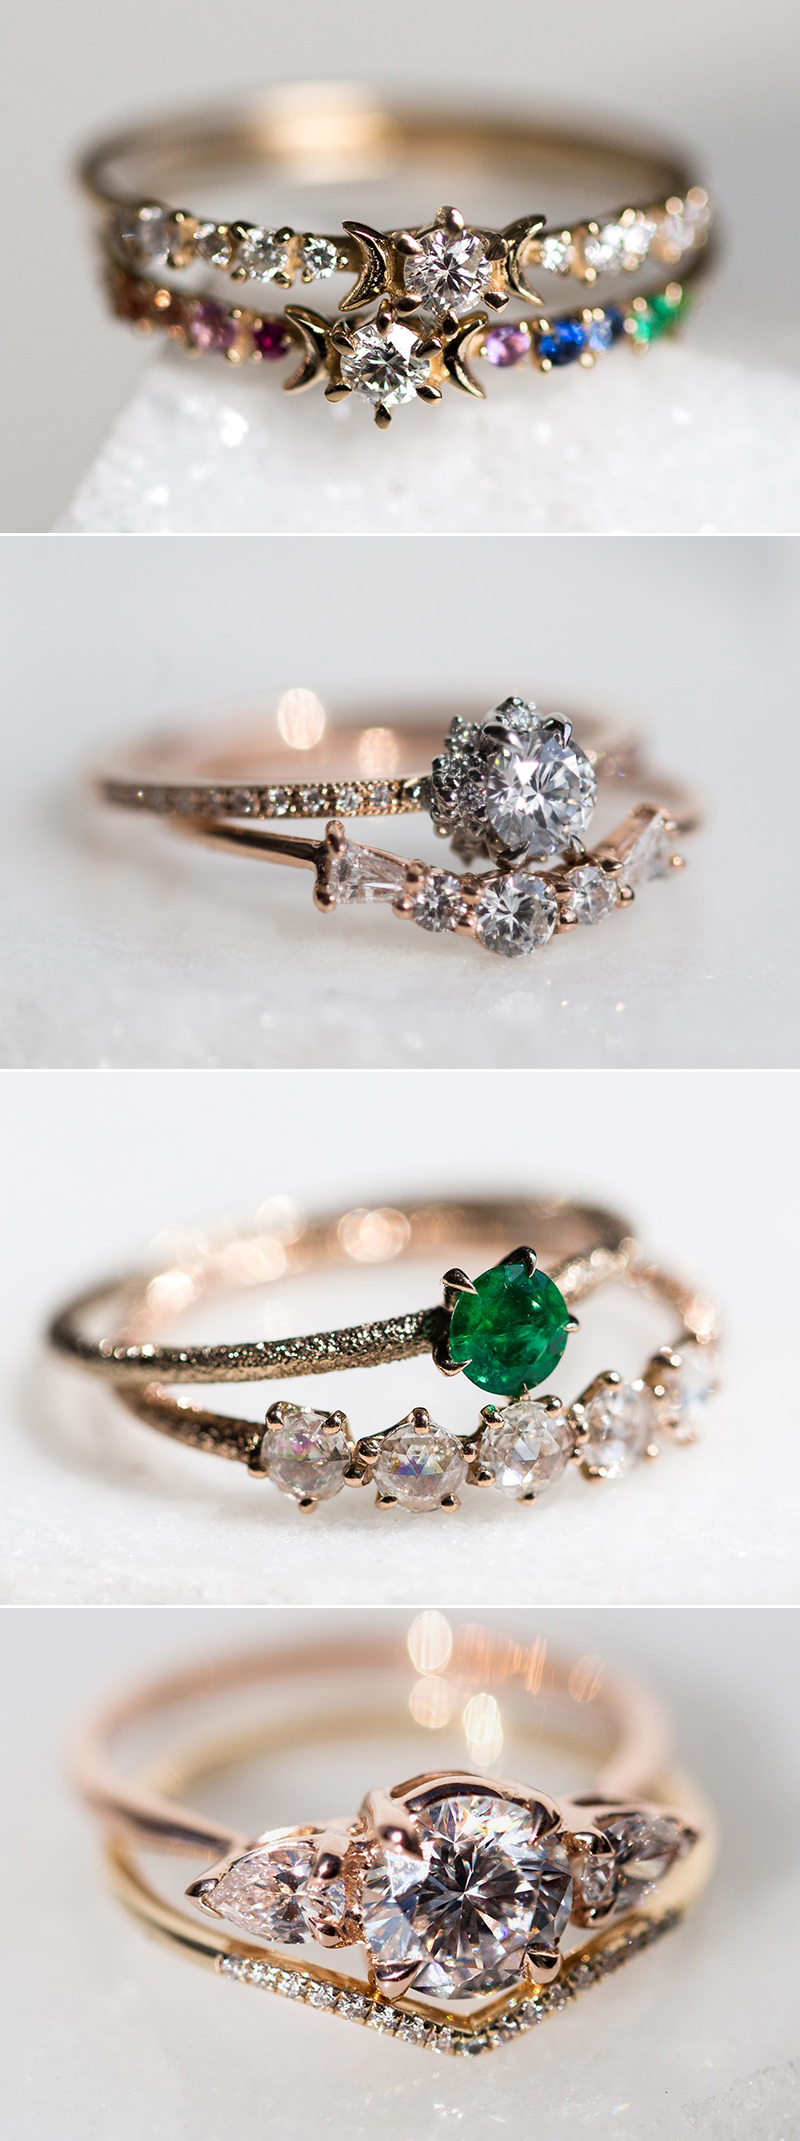 Alternative Hand-crafted Non-Traditional Engagement Rings 